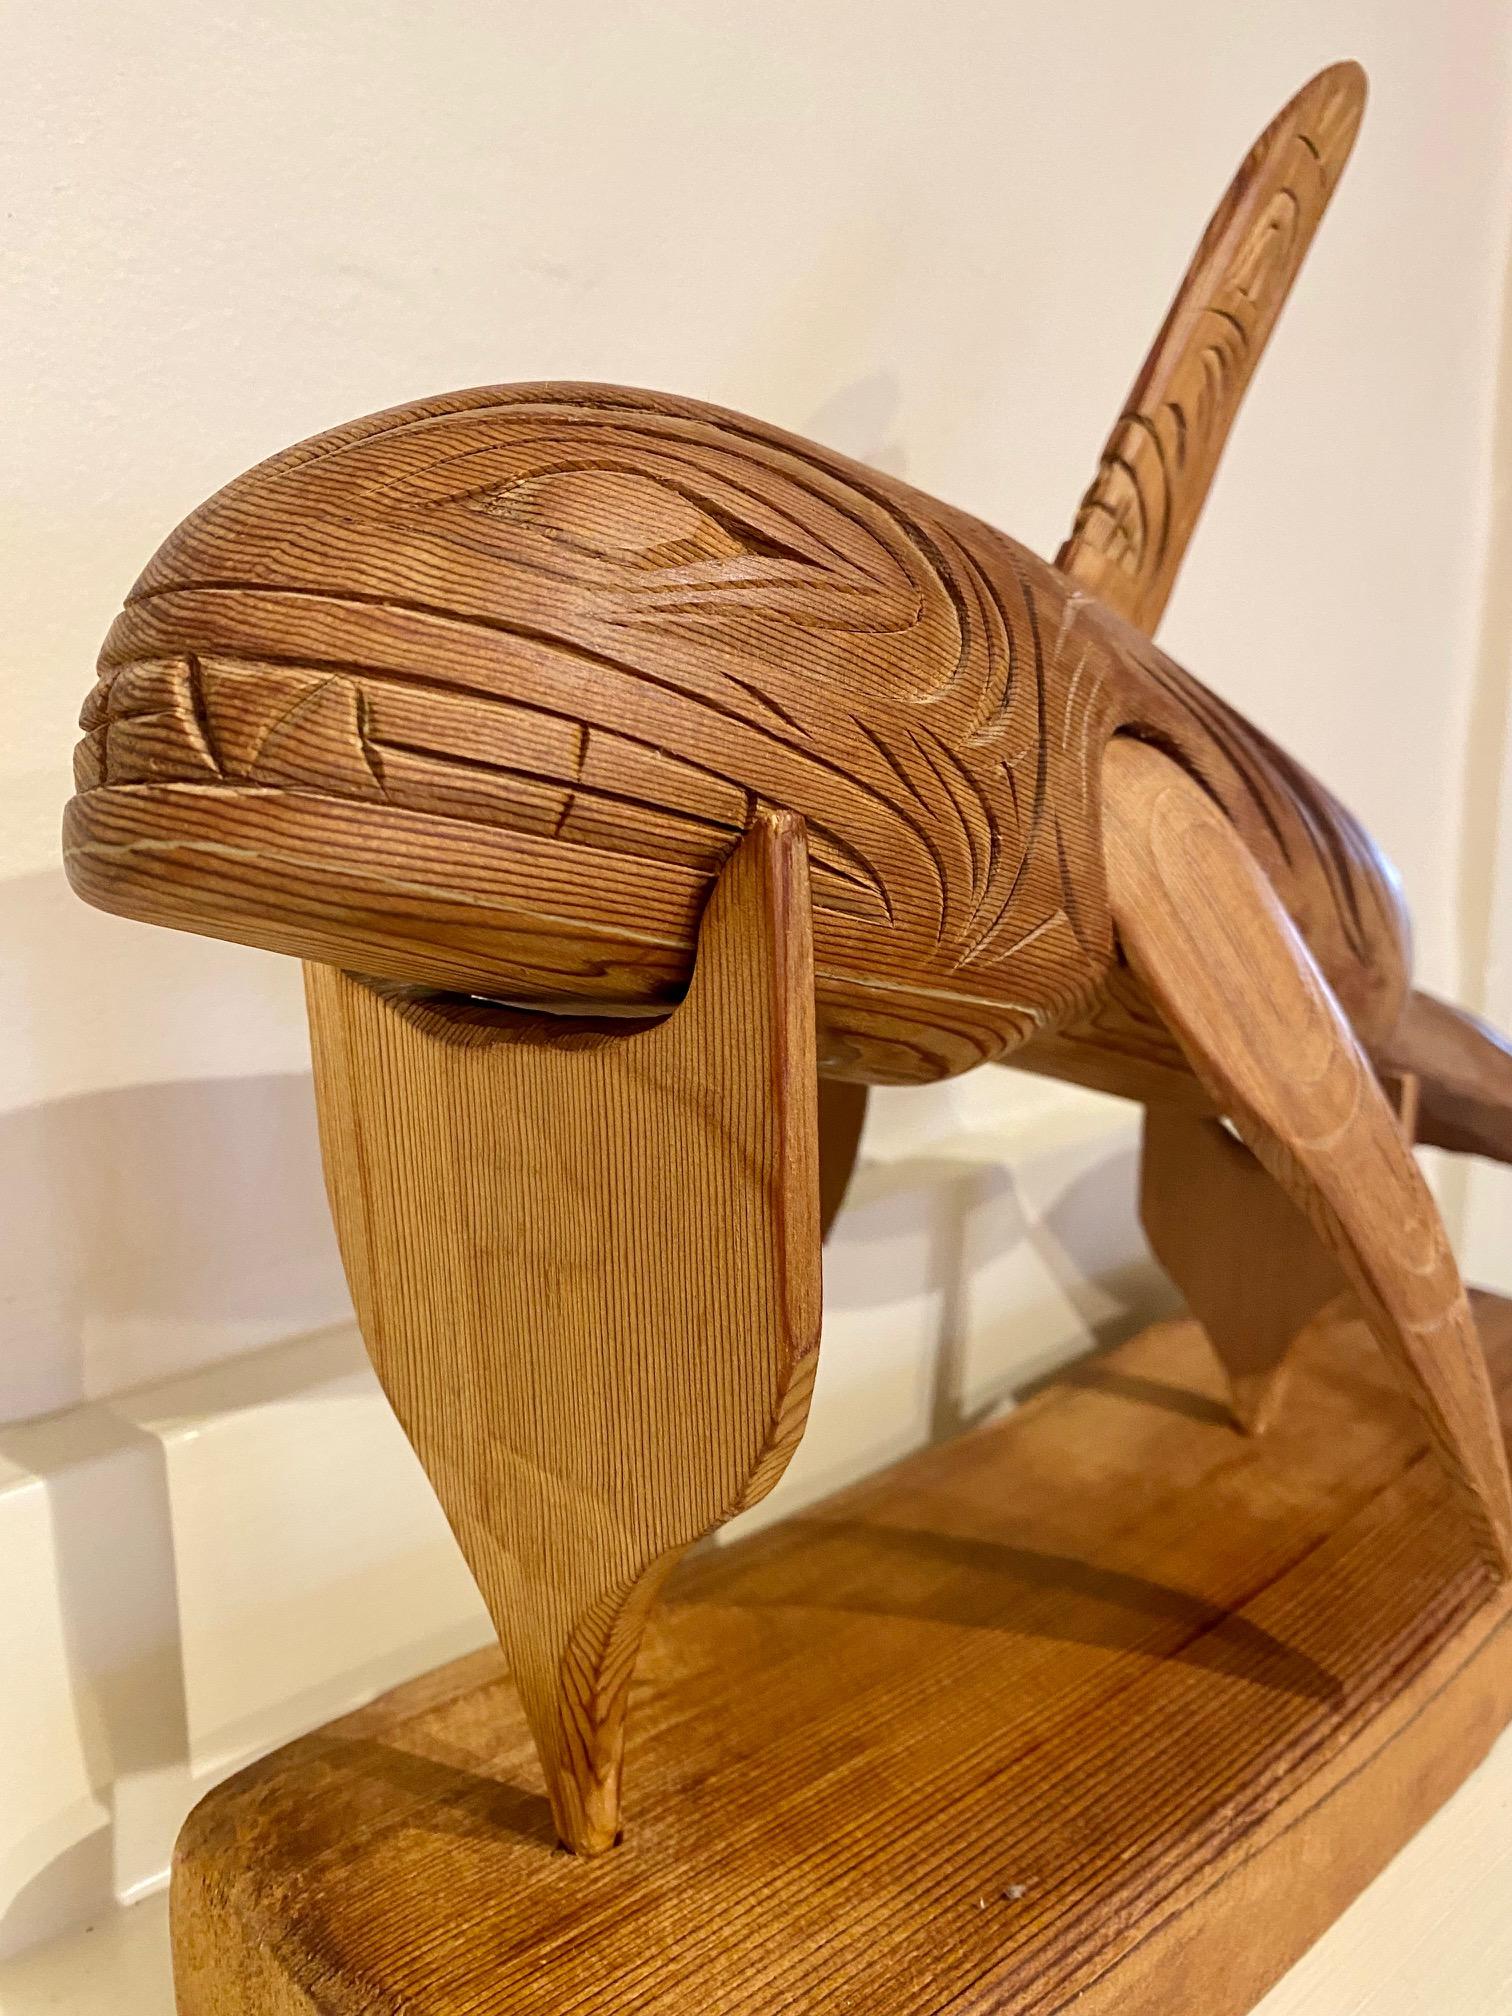 Pacific Northwest coast carved cedar killer whale rattle, by Coastal Salish - Squamish artist Stan Joseph, signed and dated 2012, a beautiful and deeply carved hollow cedar dance rattle in the form of a Killer Whale, with relief carved eyes and